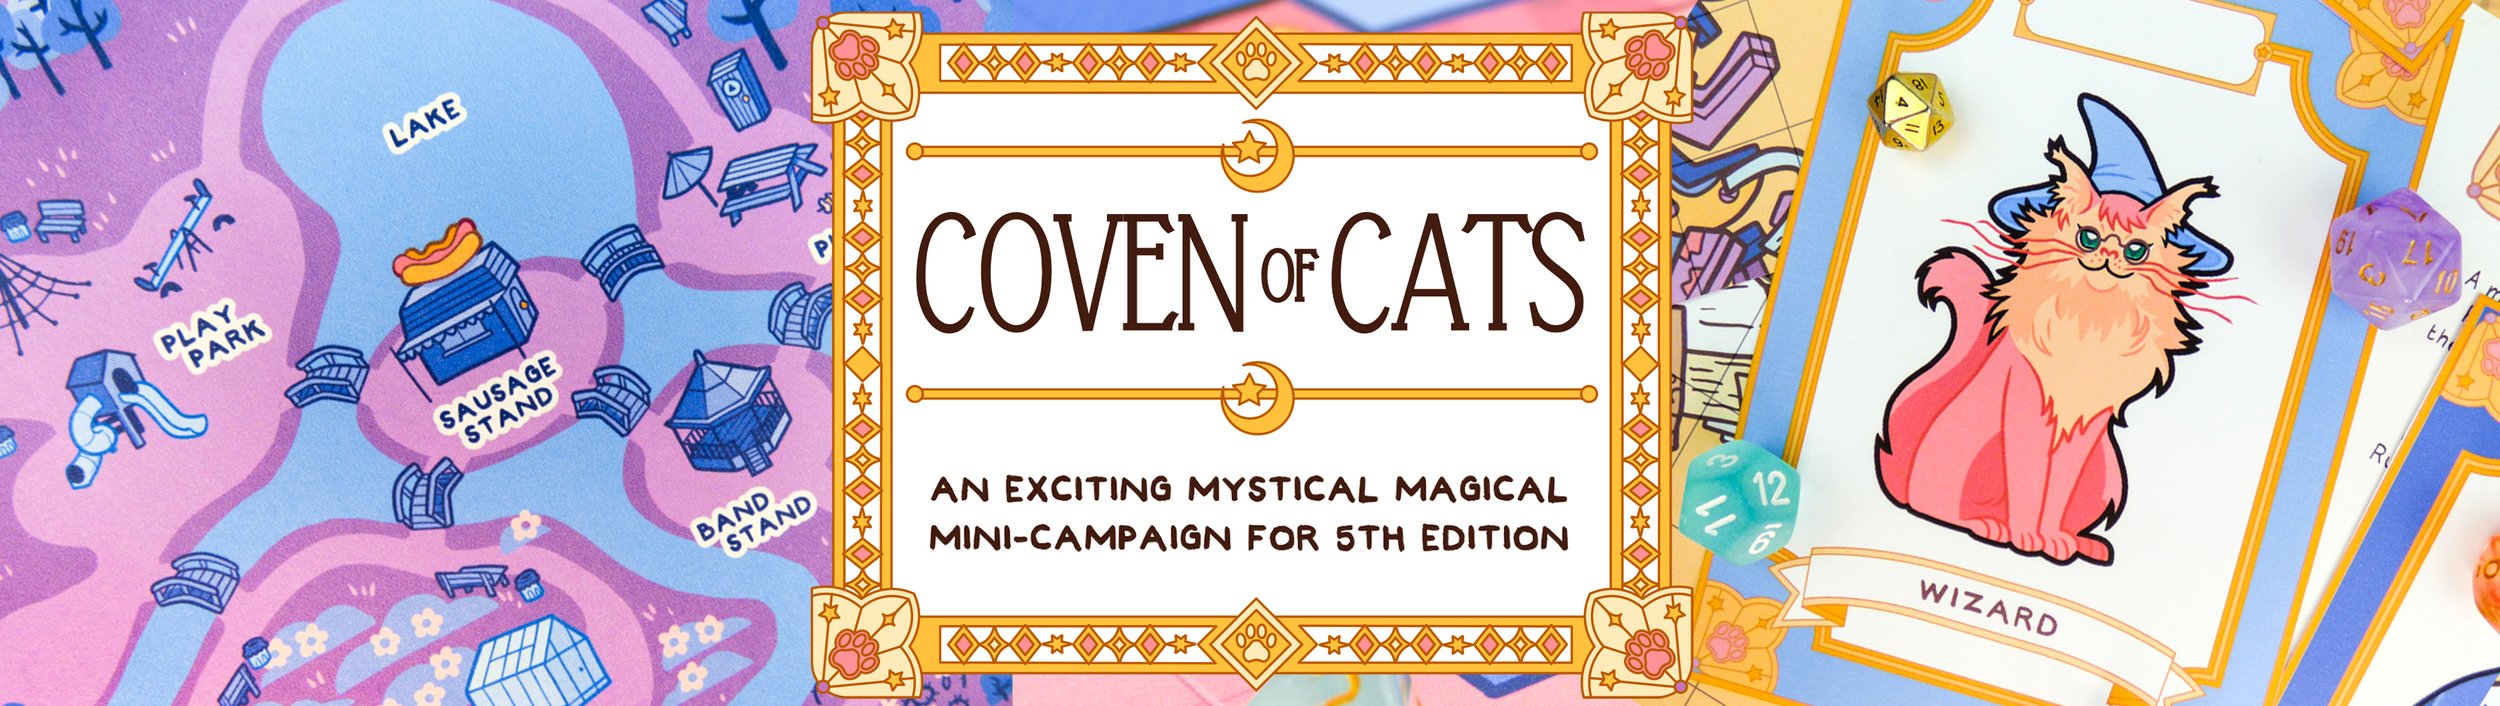 COVEN OF CATS BANNER AD 3.jpg